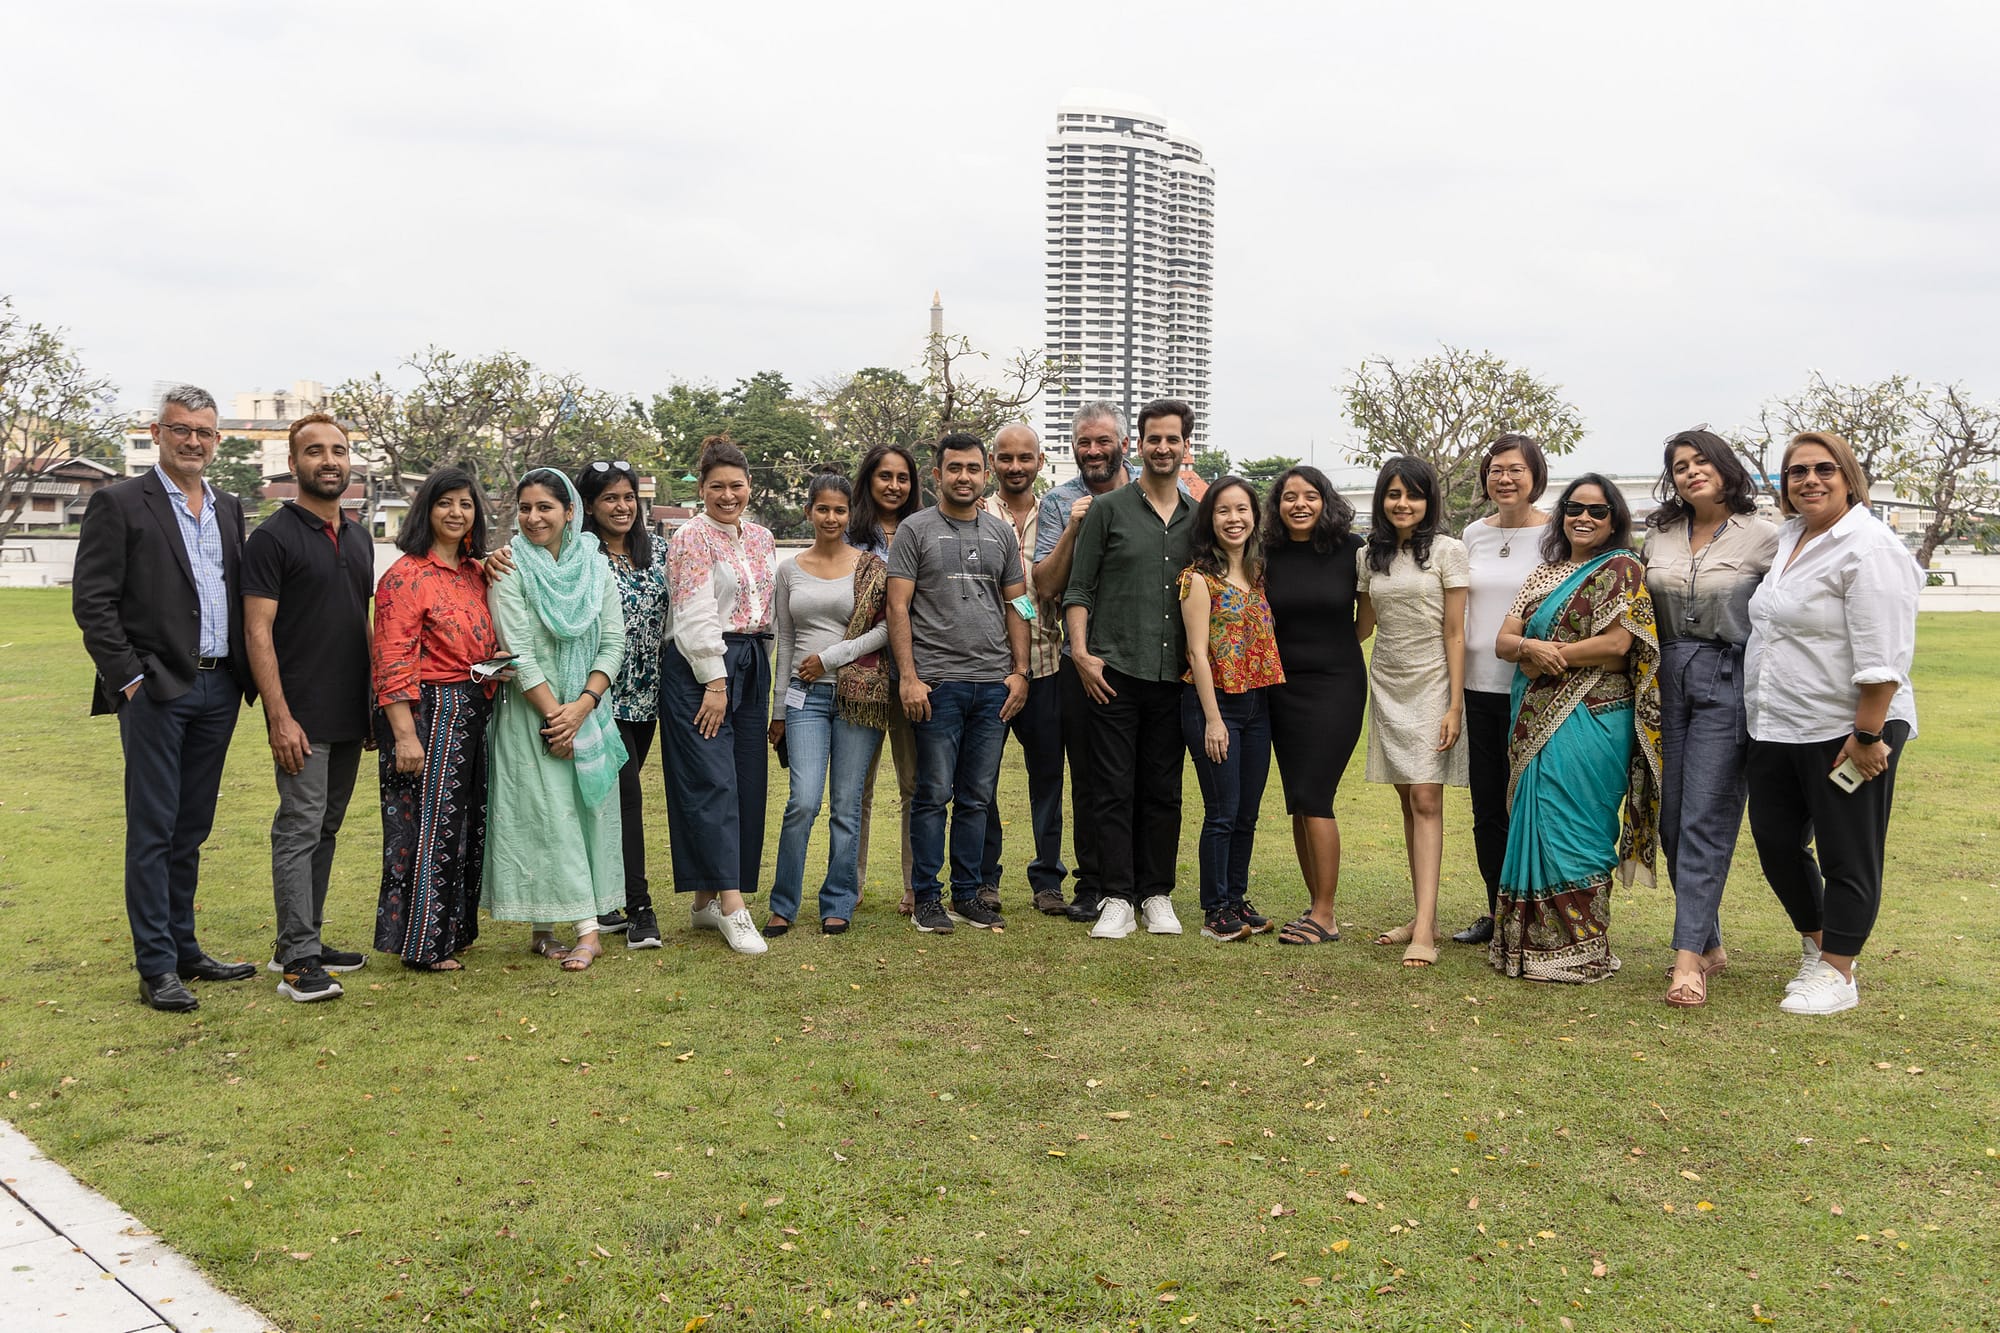 Group photo of journalists who attended the 2022 DNDi Asia Media Workshop and DNDi staff